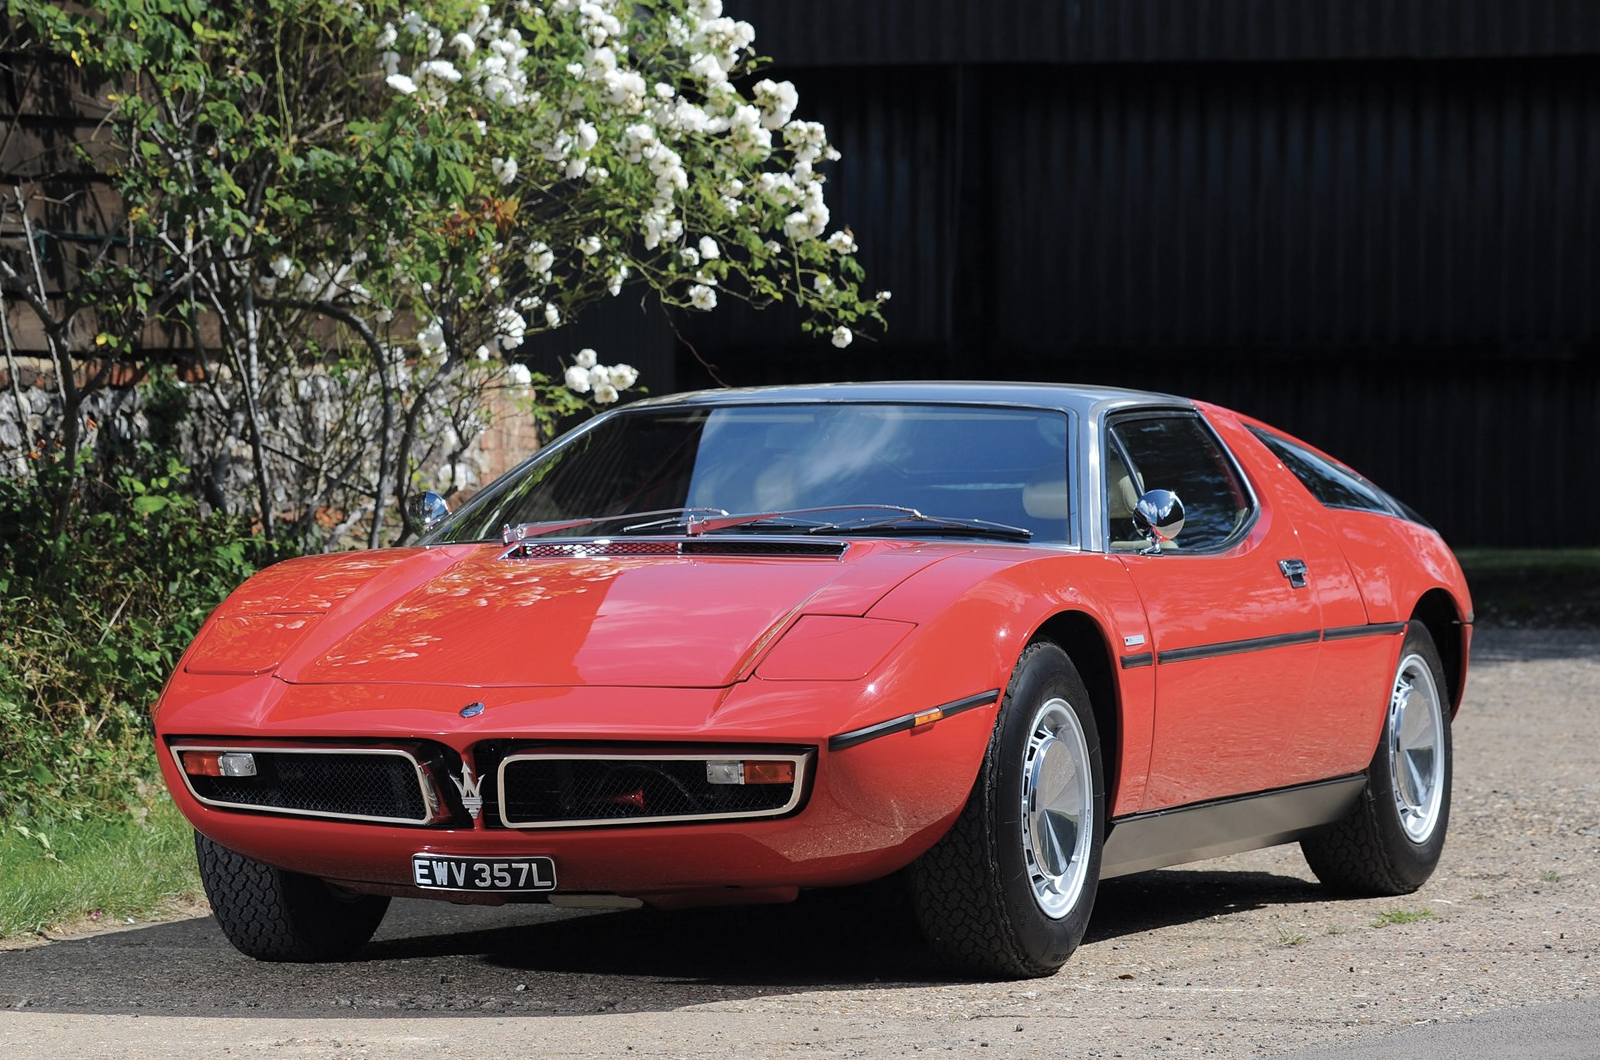 Meet the £3m Maserati collection for sale next month at RM Sotheby's London auction 